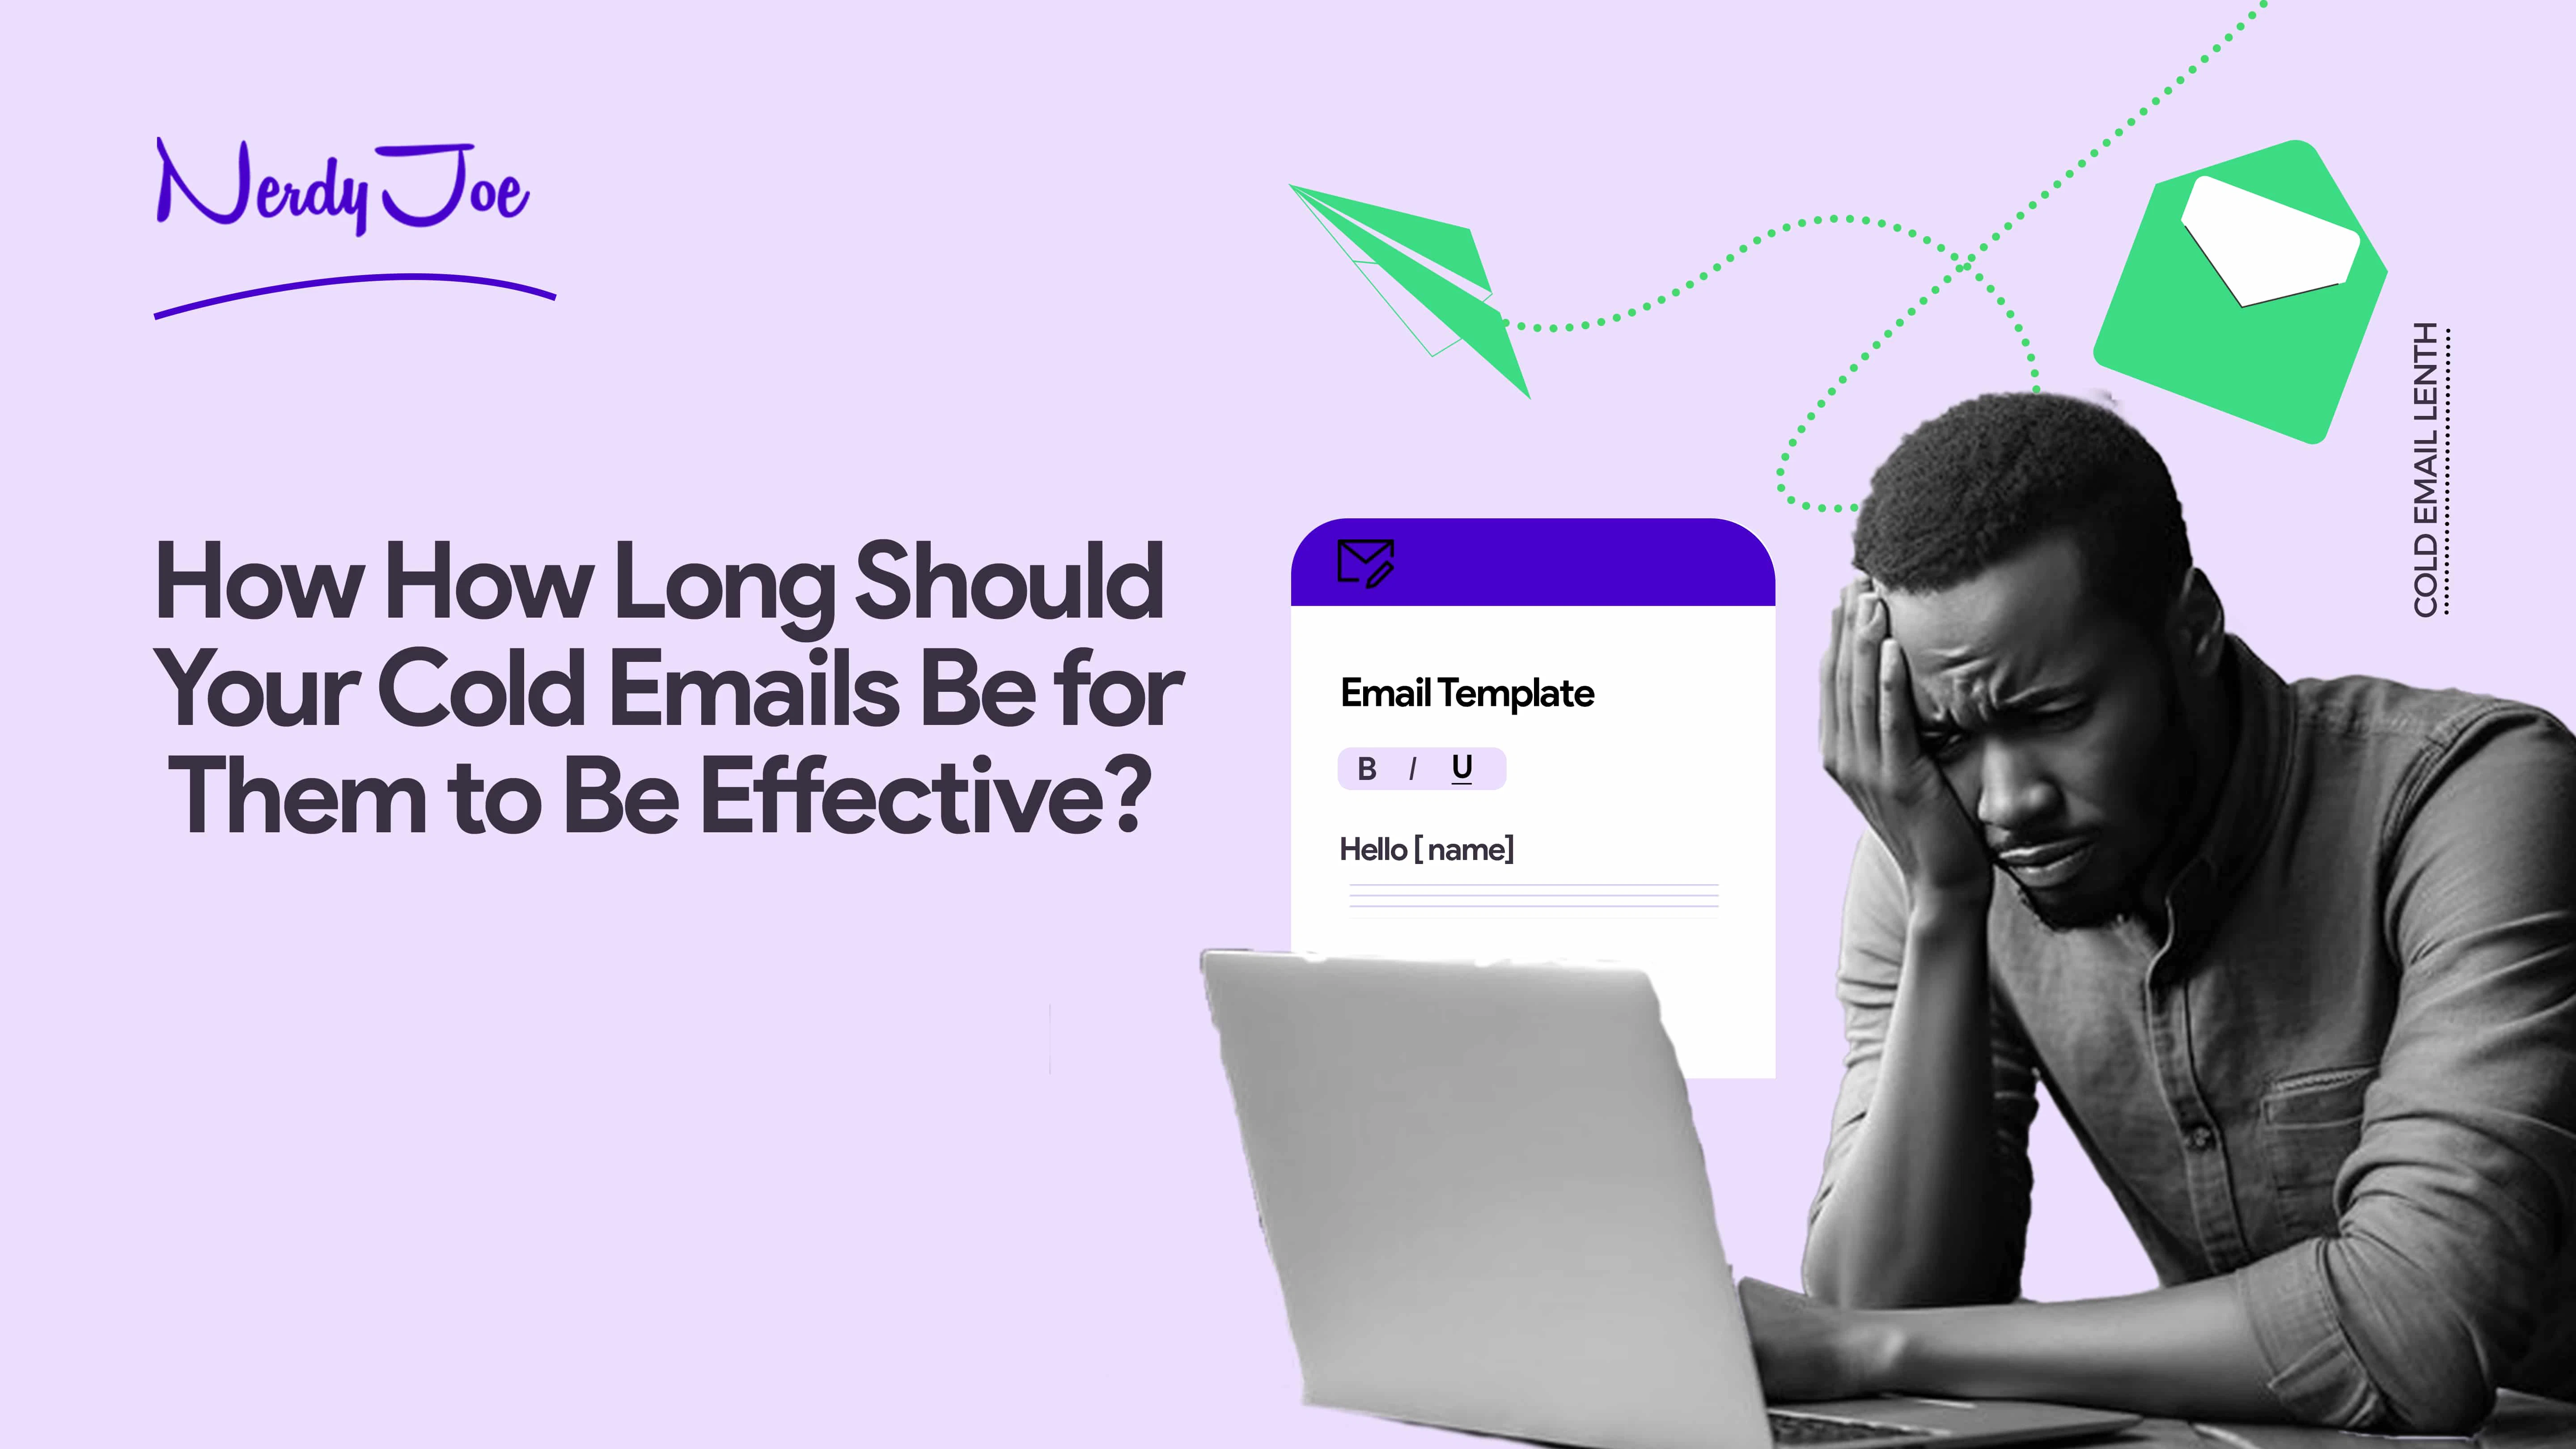 How Long Should Your Cold Emails Be?